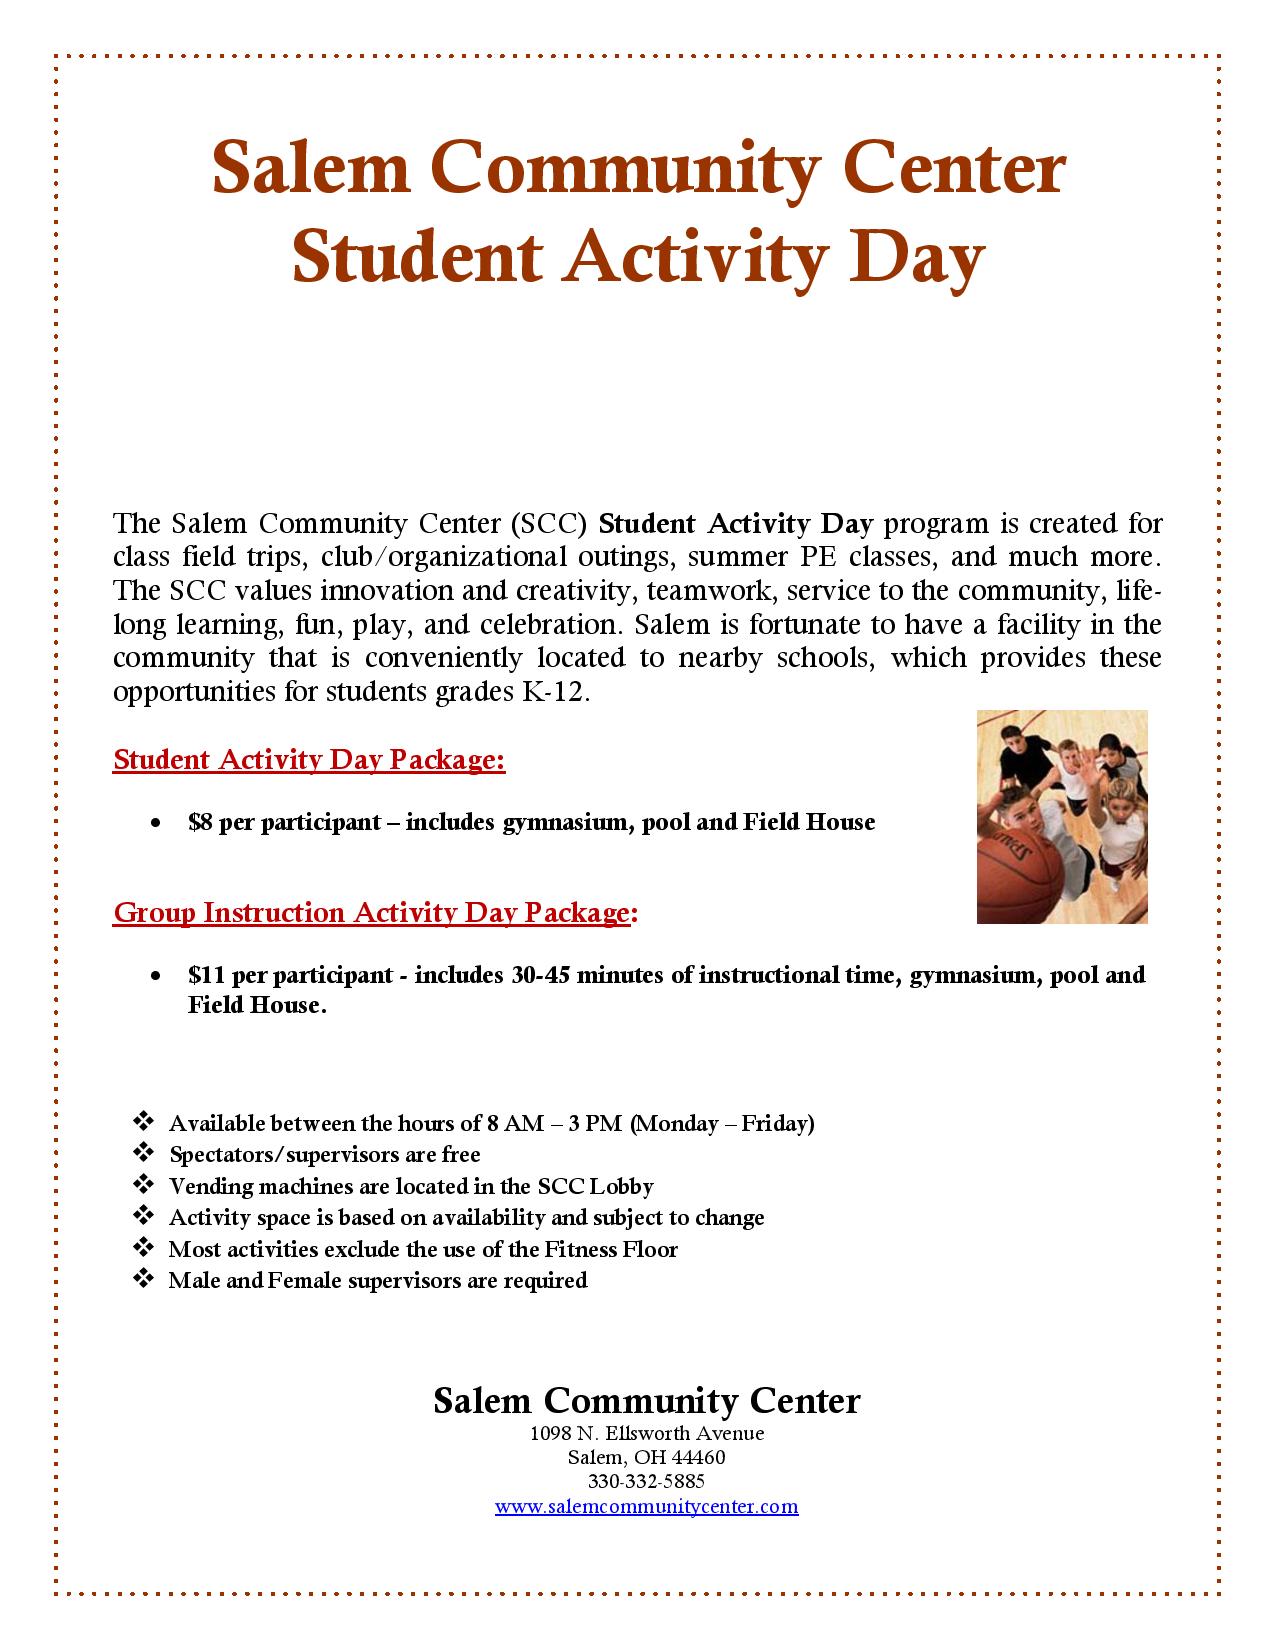 Student Activity Day Flyer page 001 1